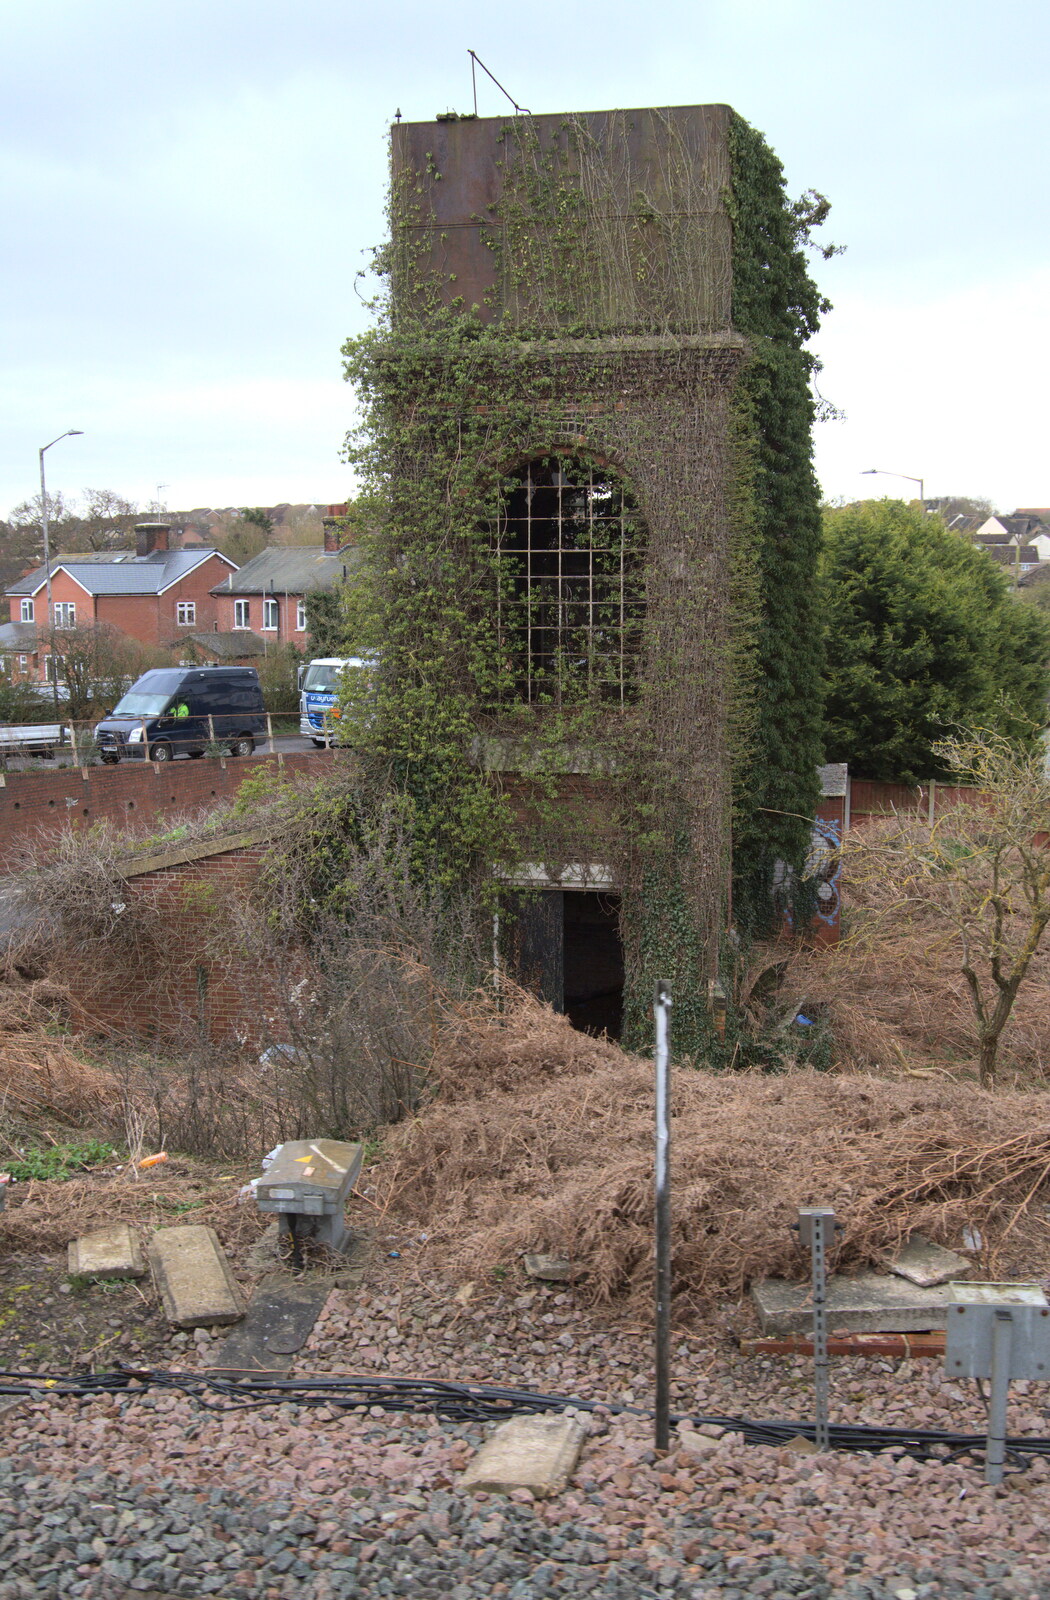 The derelict water tower in Manningtree from A SwiftKey Memorial Service, Covent Garden, London  - 13th March 2020